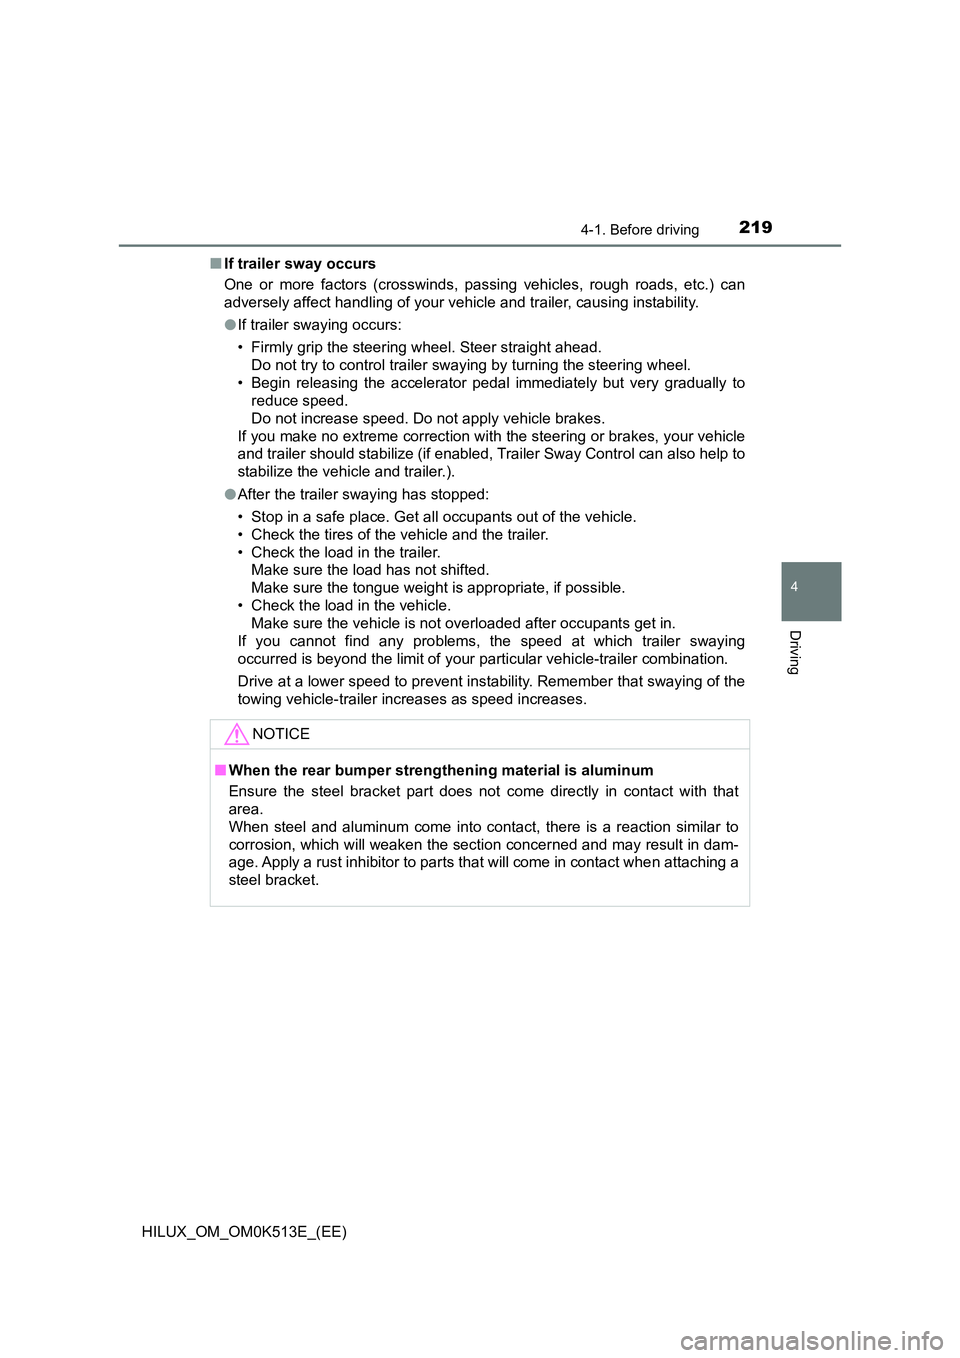 TOYOTA HILUX 2021  Owners Manual (in English) 2194-1. Before driving
4
Driving
HILUX_OM_OM0K513E_(EE) 
�Q If trailer sway occurs 
One or more factors (crosswinds, passing vehicles, rough roads, etc.) can 
adversely affect handling of your vehicle